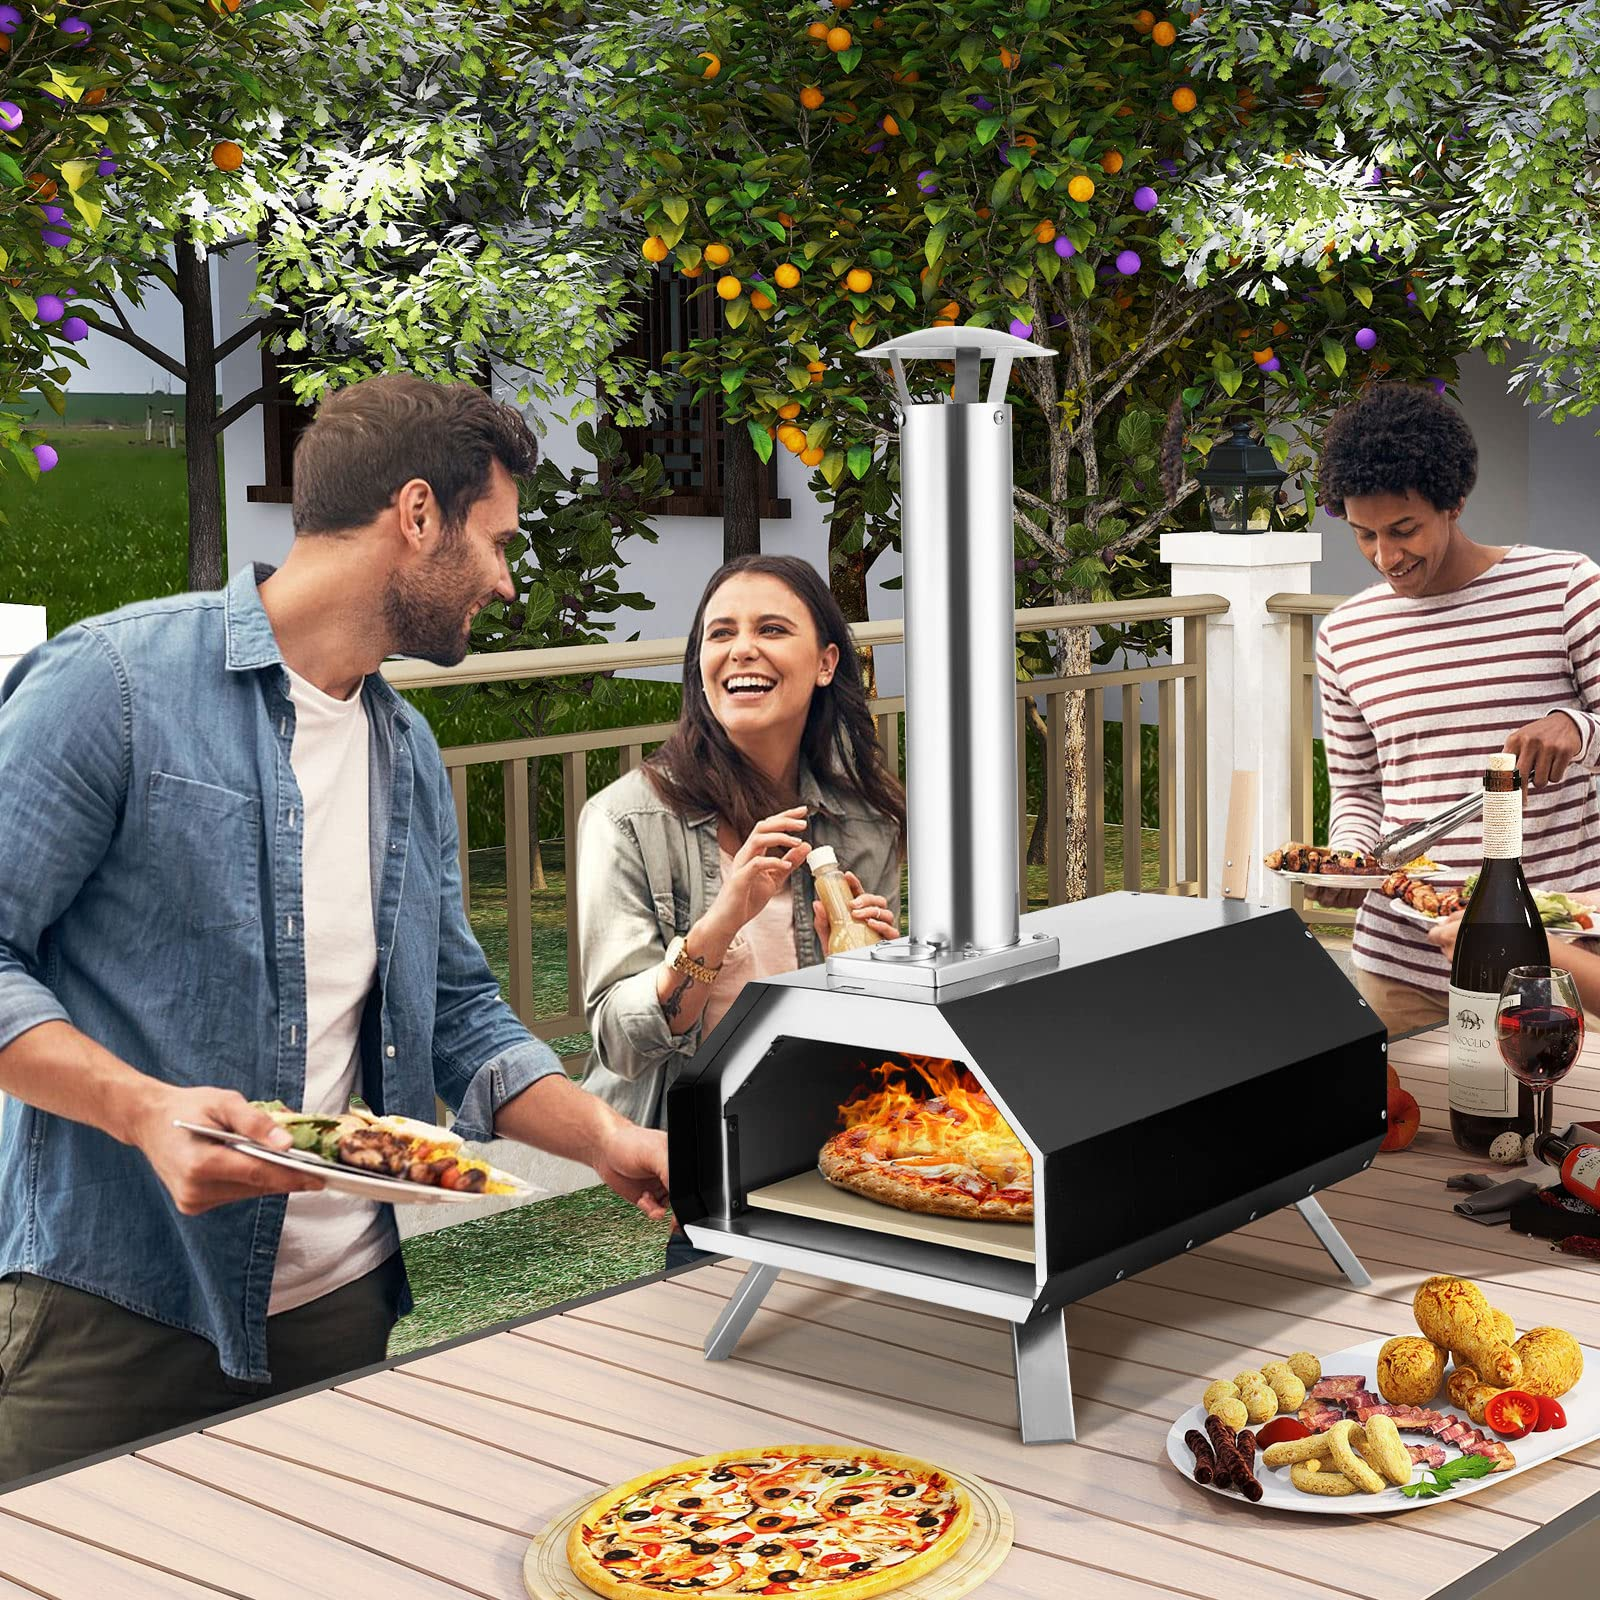 Giantex Outdoor Pizza Oven, Wood Pellet Fired Pizza Grill with 12'' Pizza Stone, Pizza Peel, (Black & Silver)